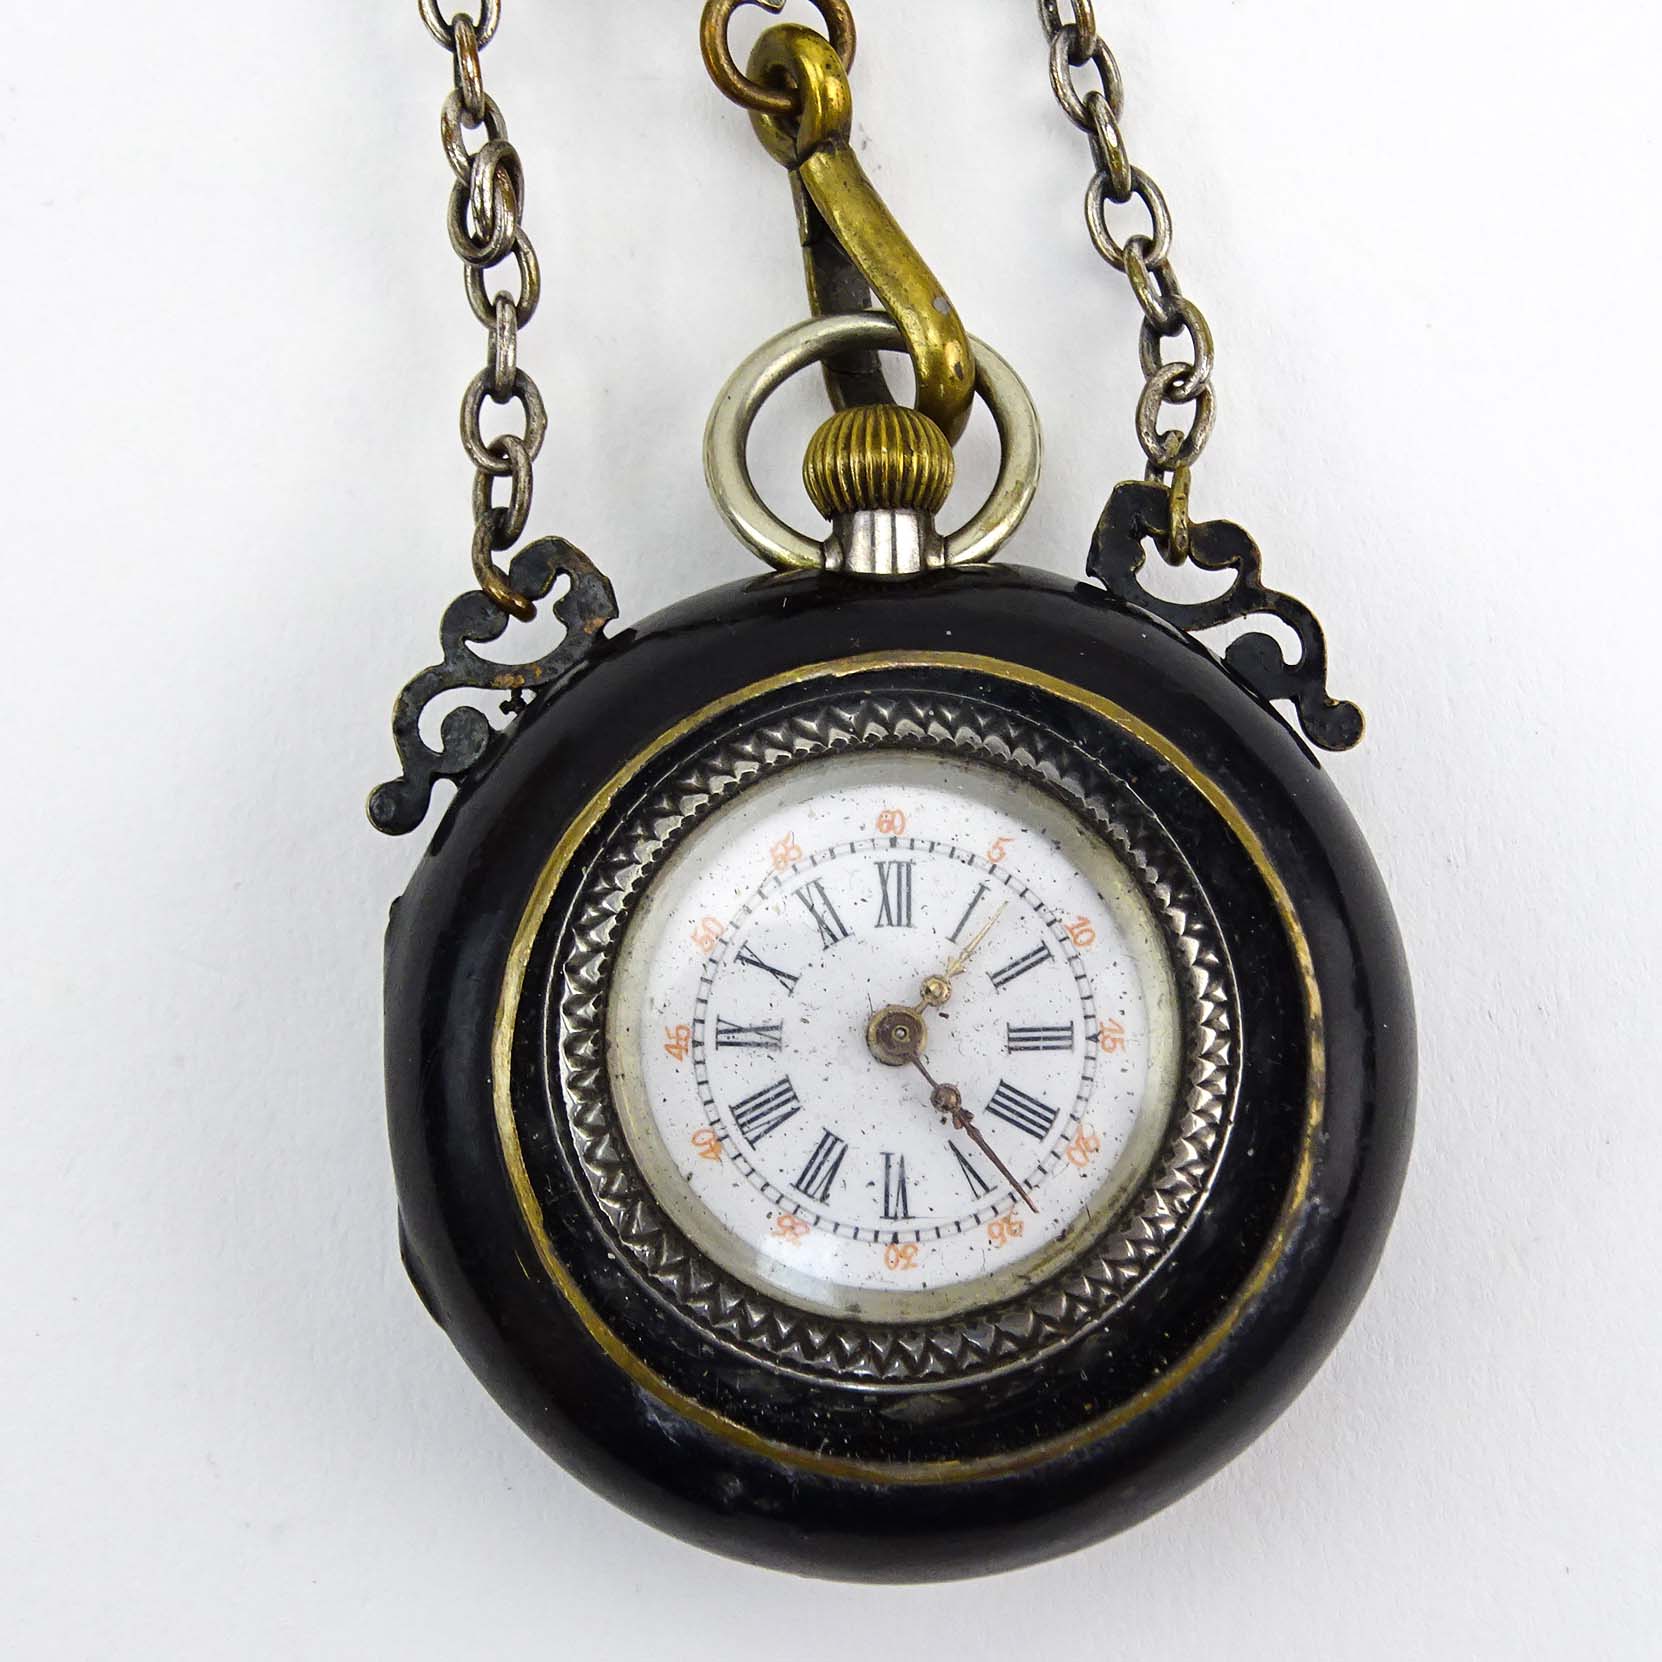 Antique Chatelaine with Lady's 835 Silver Locle Pocket Watch.